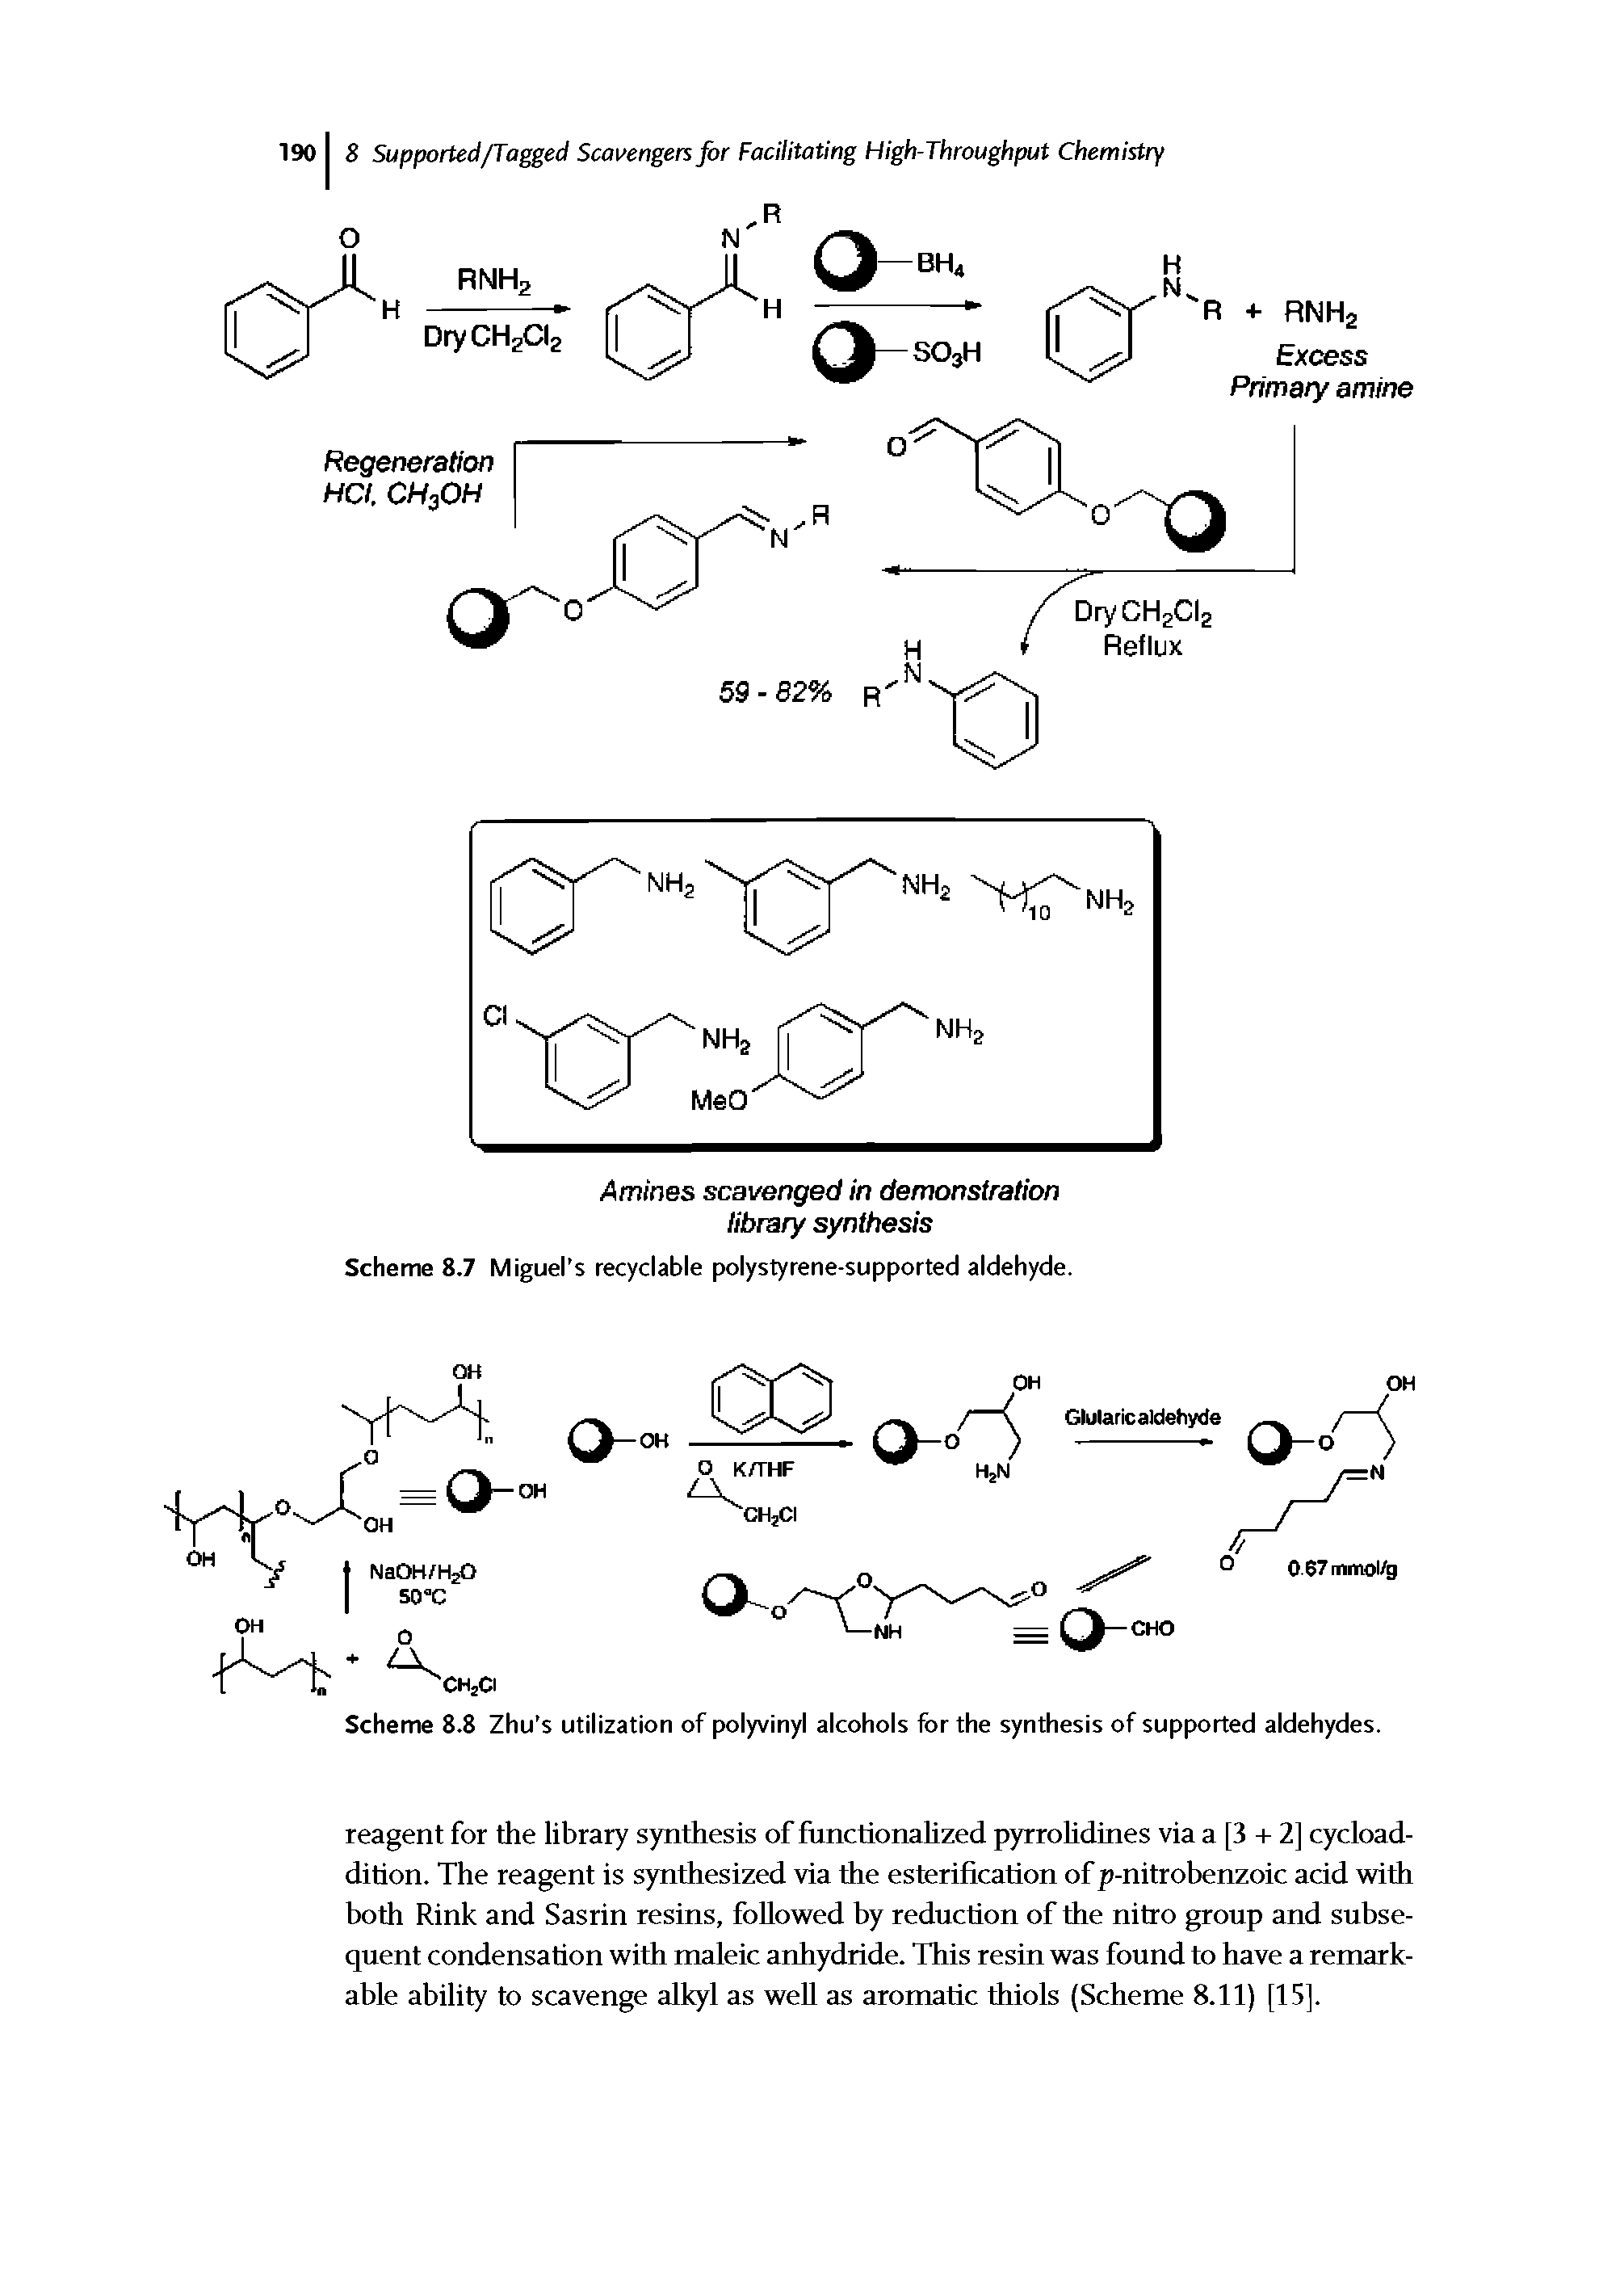 Scheme 8.8 Zhu s utilization of polyvinyl alcohols for the synthesis of supported aldehydes.